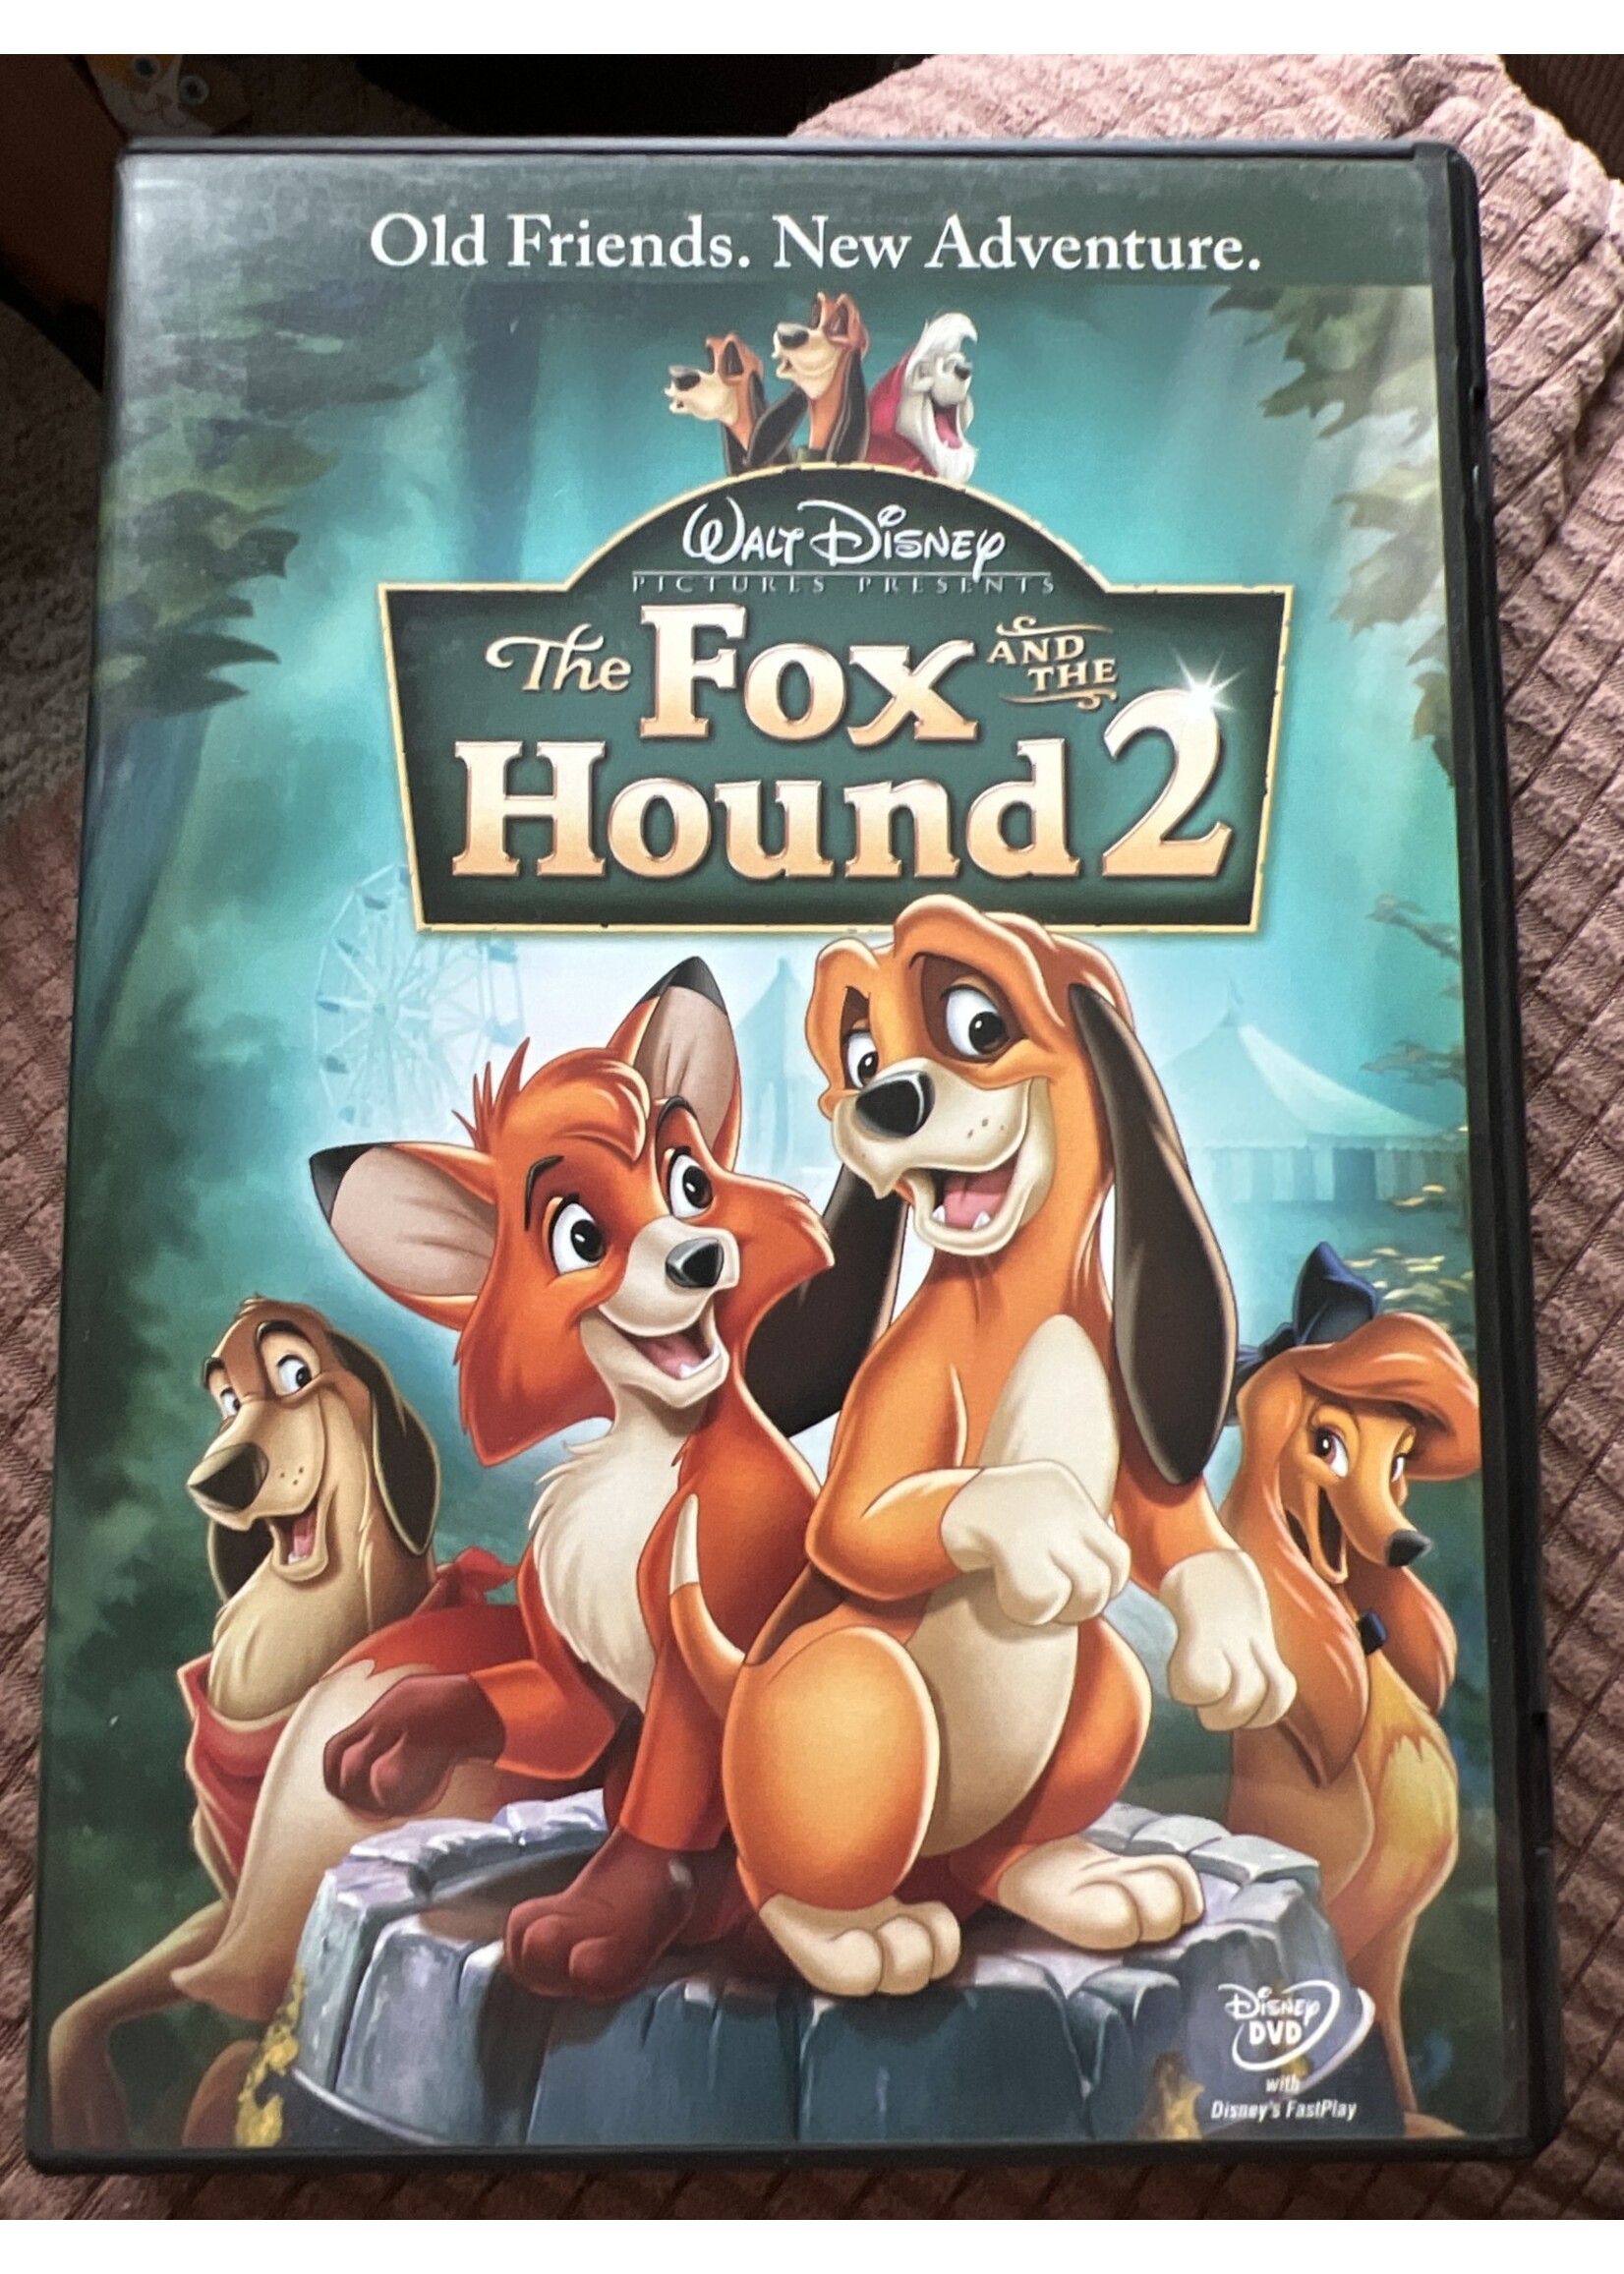 The Fox and the Hound 2 DVD